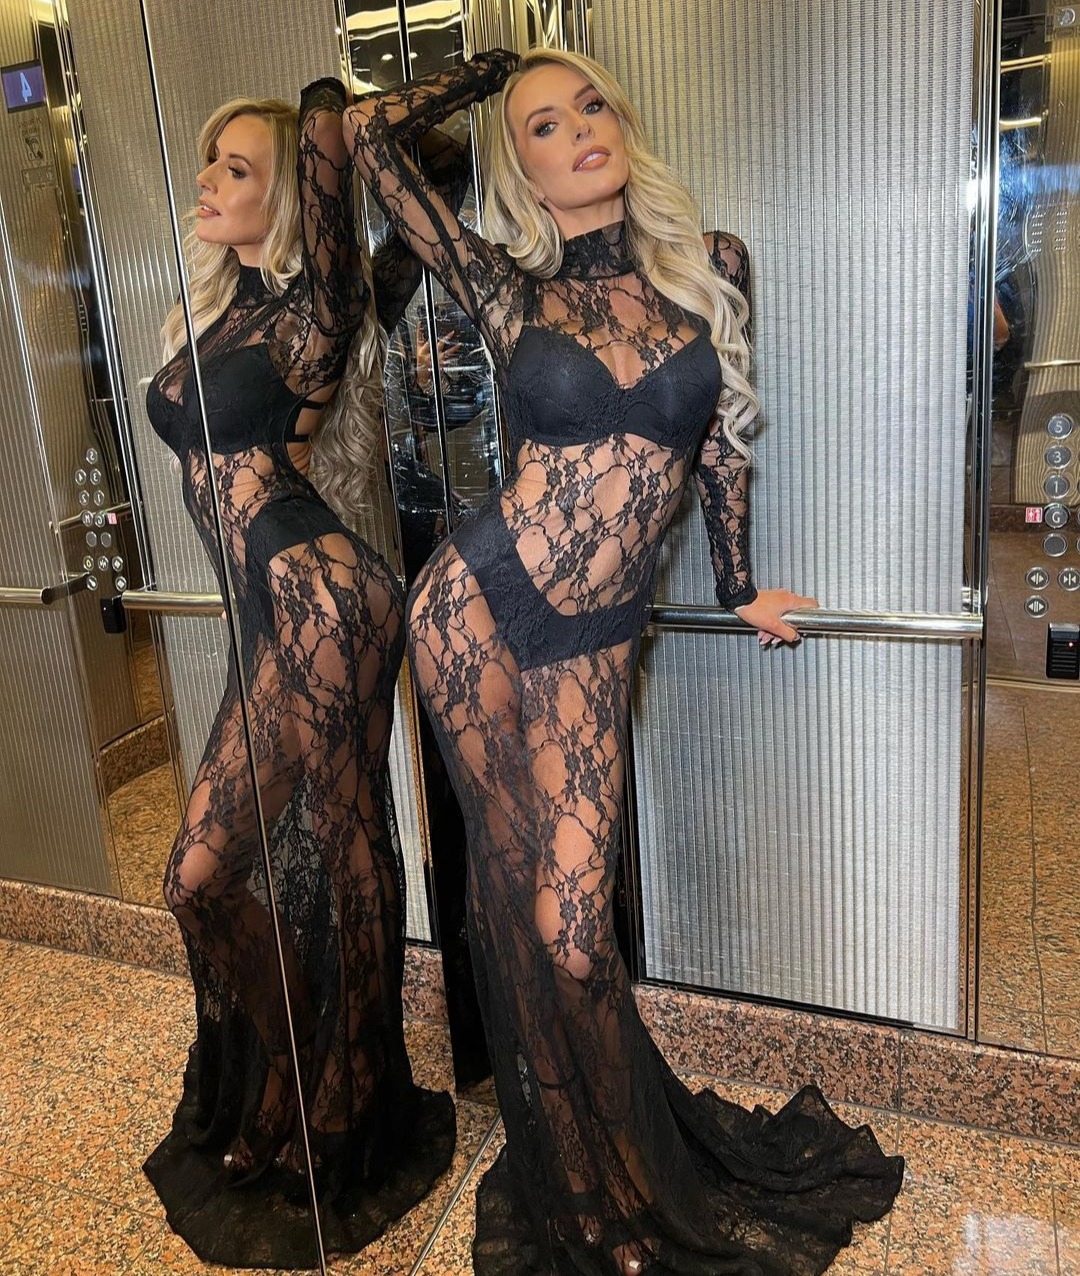 Faye Winter hits back at cruel troll after she’s called an ‘attention seeker’ for wearing see-through dress